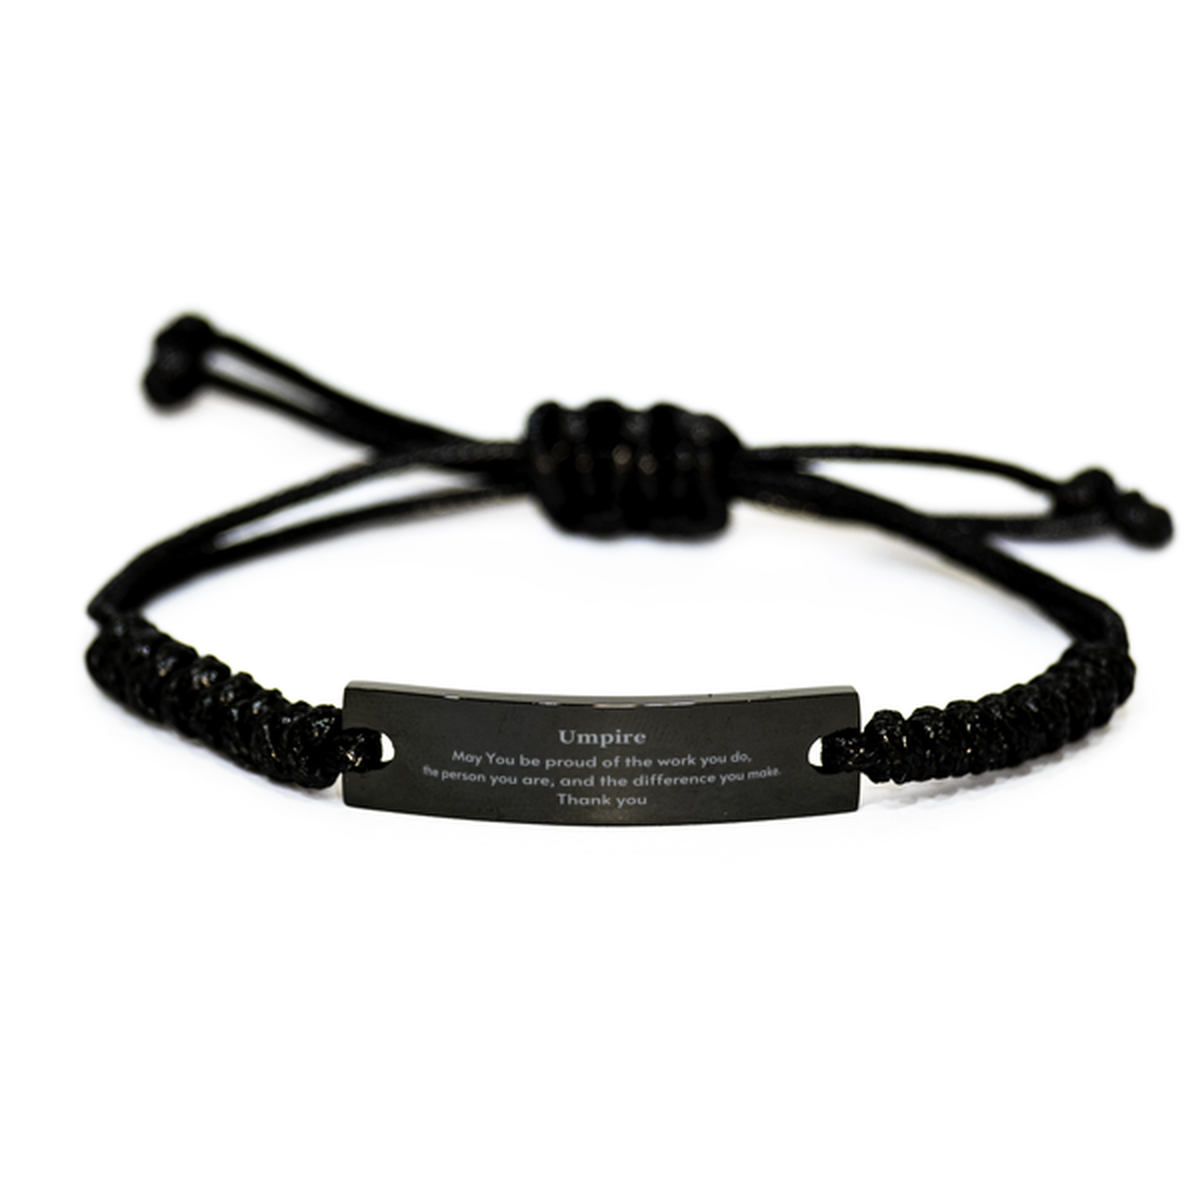 Heartwarming Black Rope Bracelet Retirement Coworkers Gifts for Umpire, Umpire May You be proud of the work you do, the person you are Gifts for Boss Men Women Friends